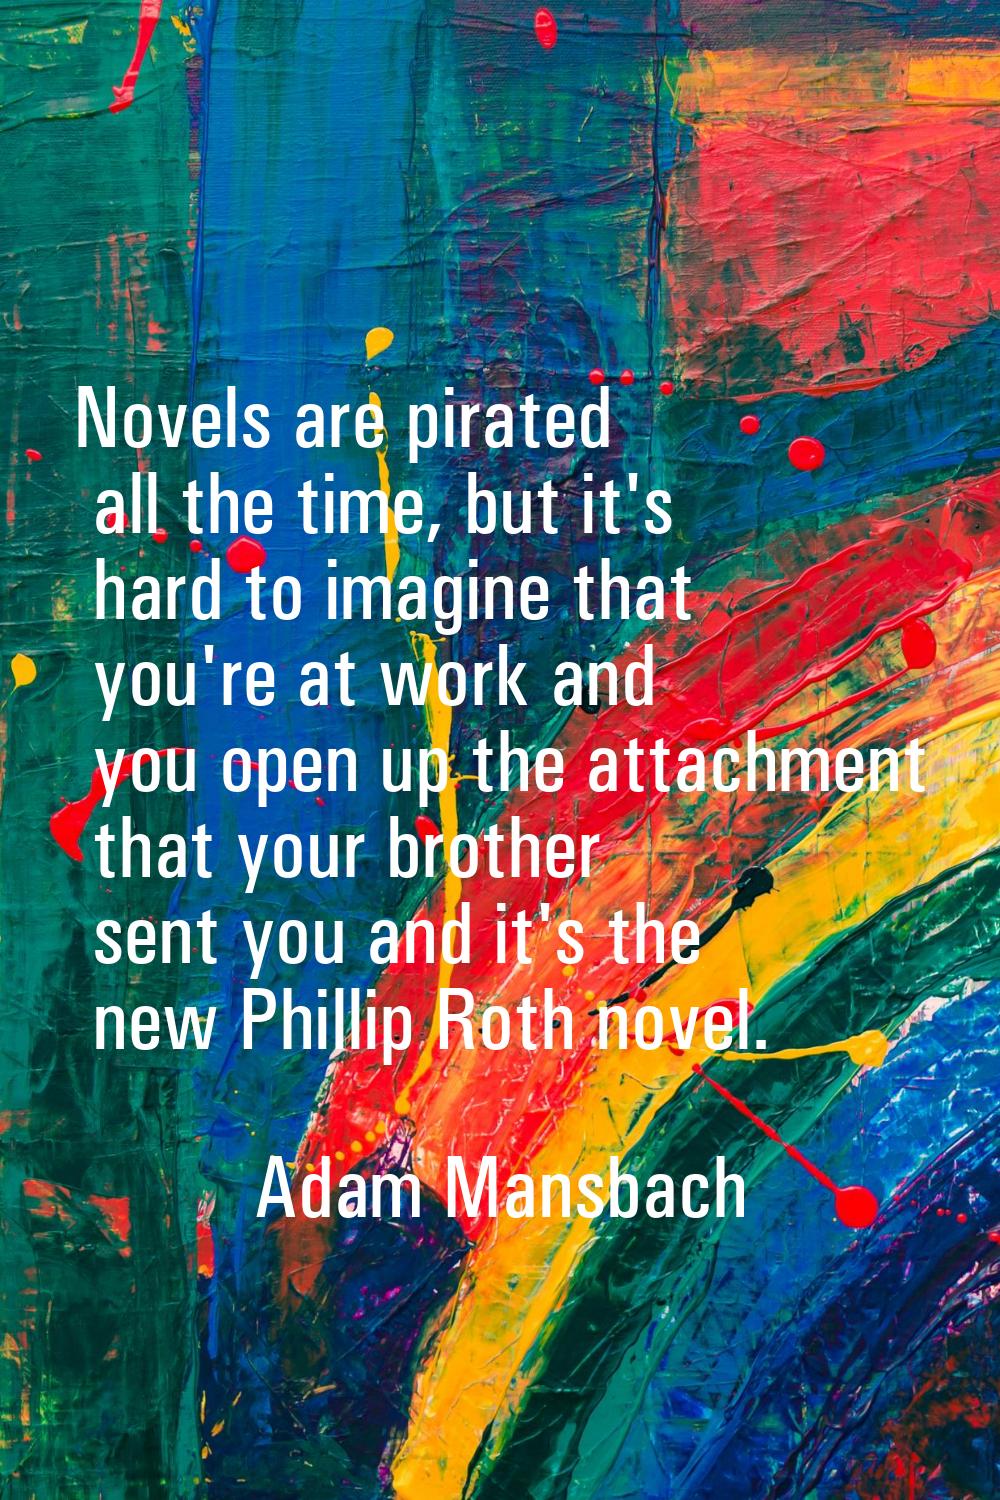 Novels are pirated all the time, but it's hard to imagine that you're at work and you open up the a